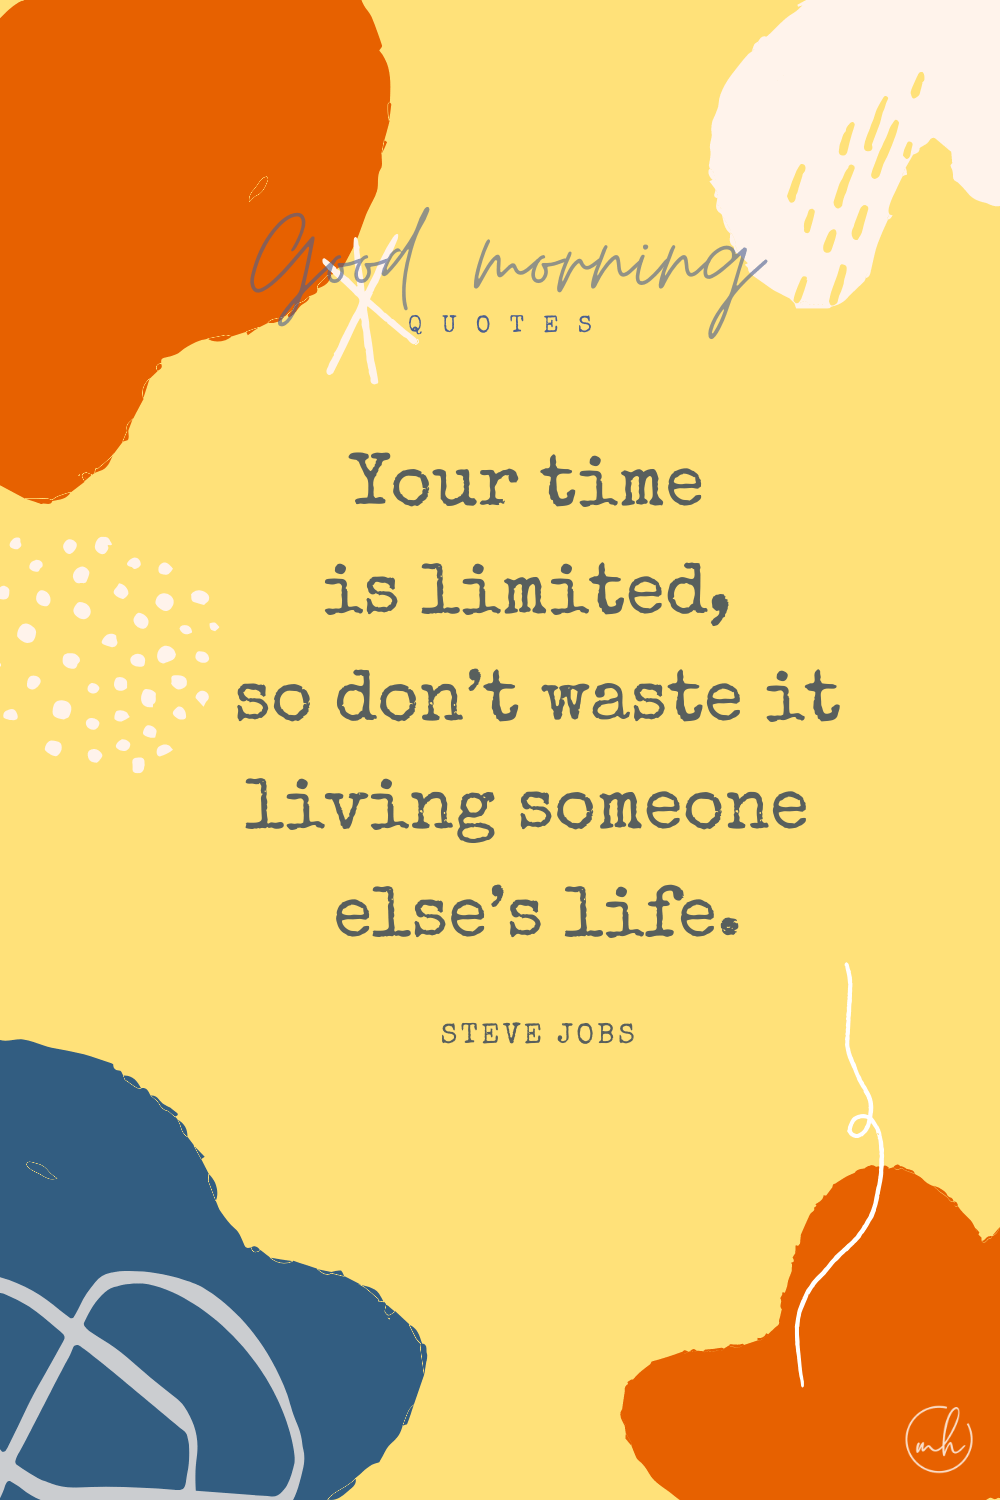 "Your time is limited, so don’t waste it living someone else’s life." – Steve Jobs